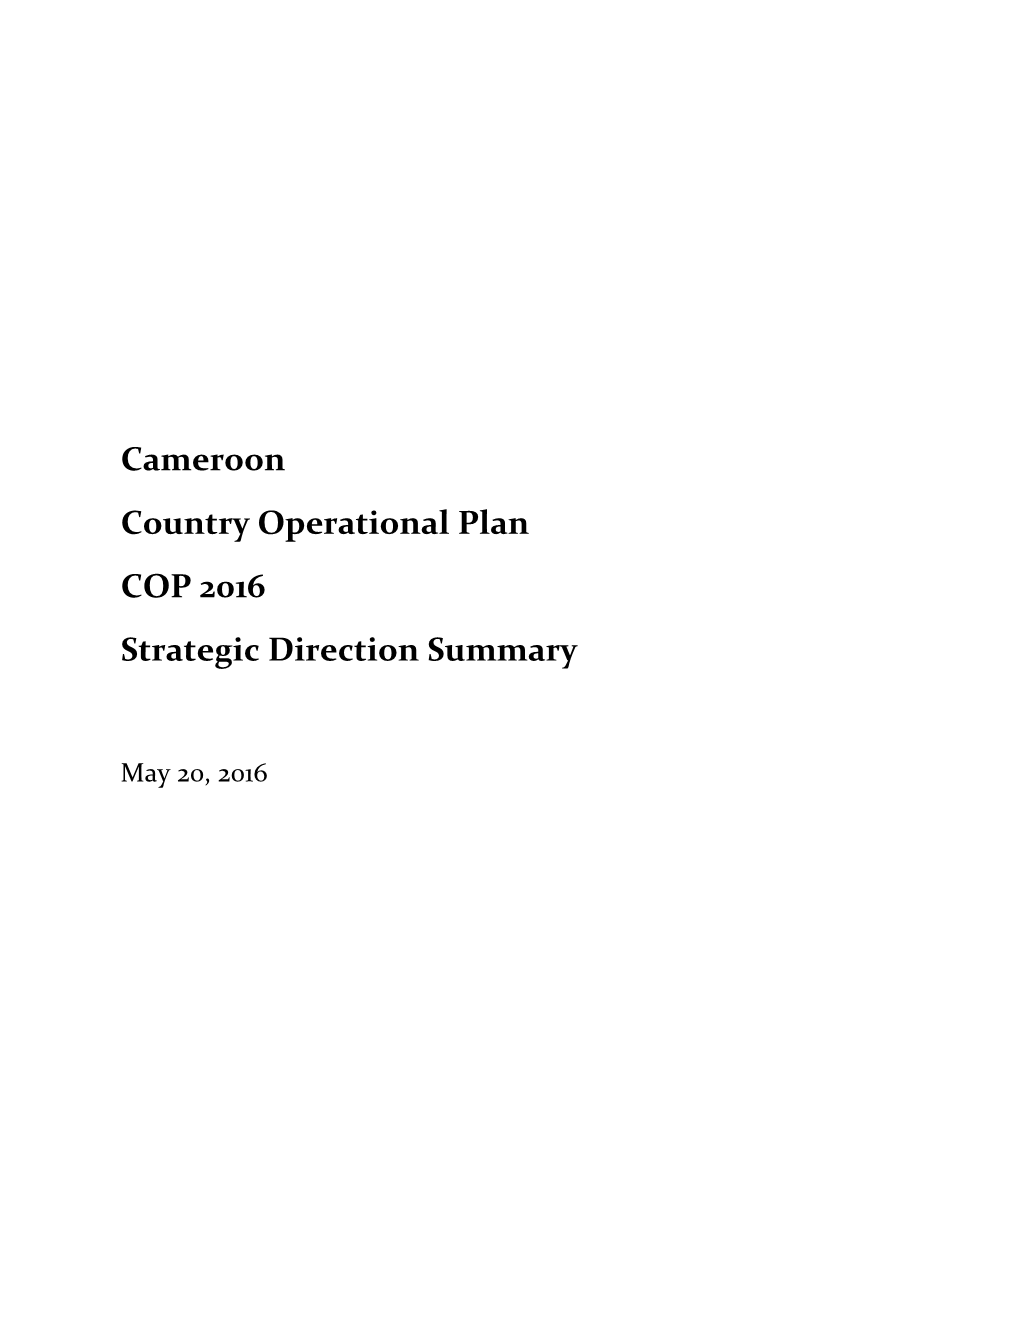 Cameroon Country Operational Plan COP 2016 Strategic Direction Summary